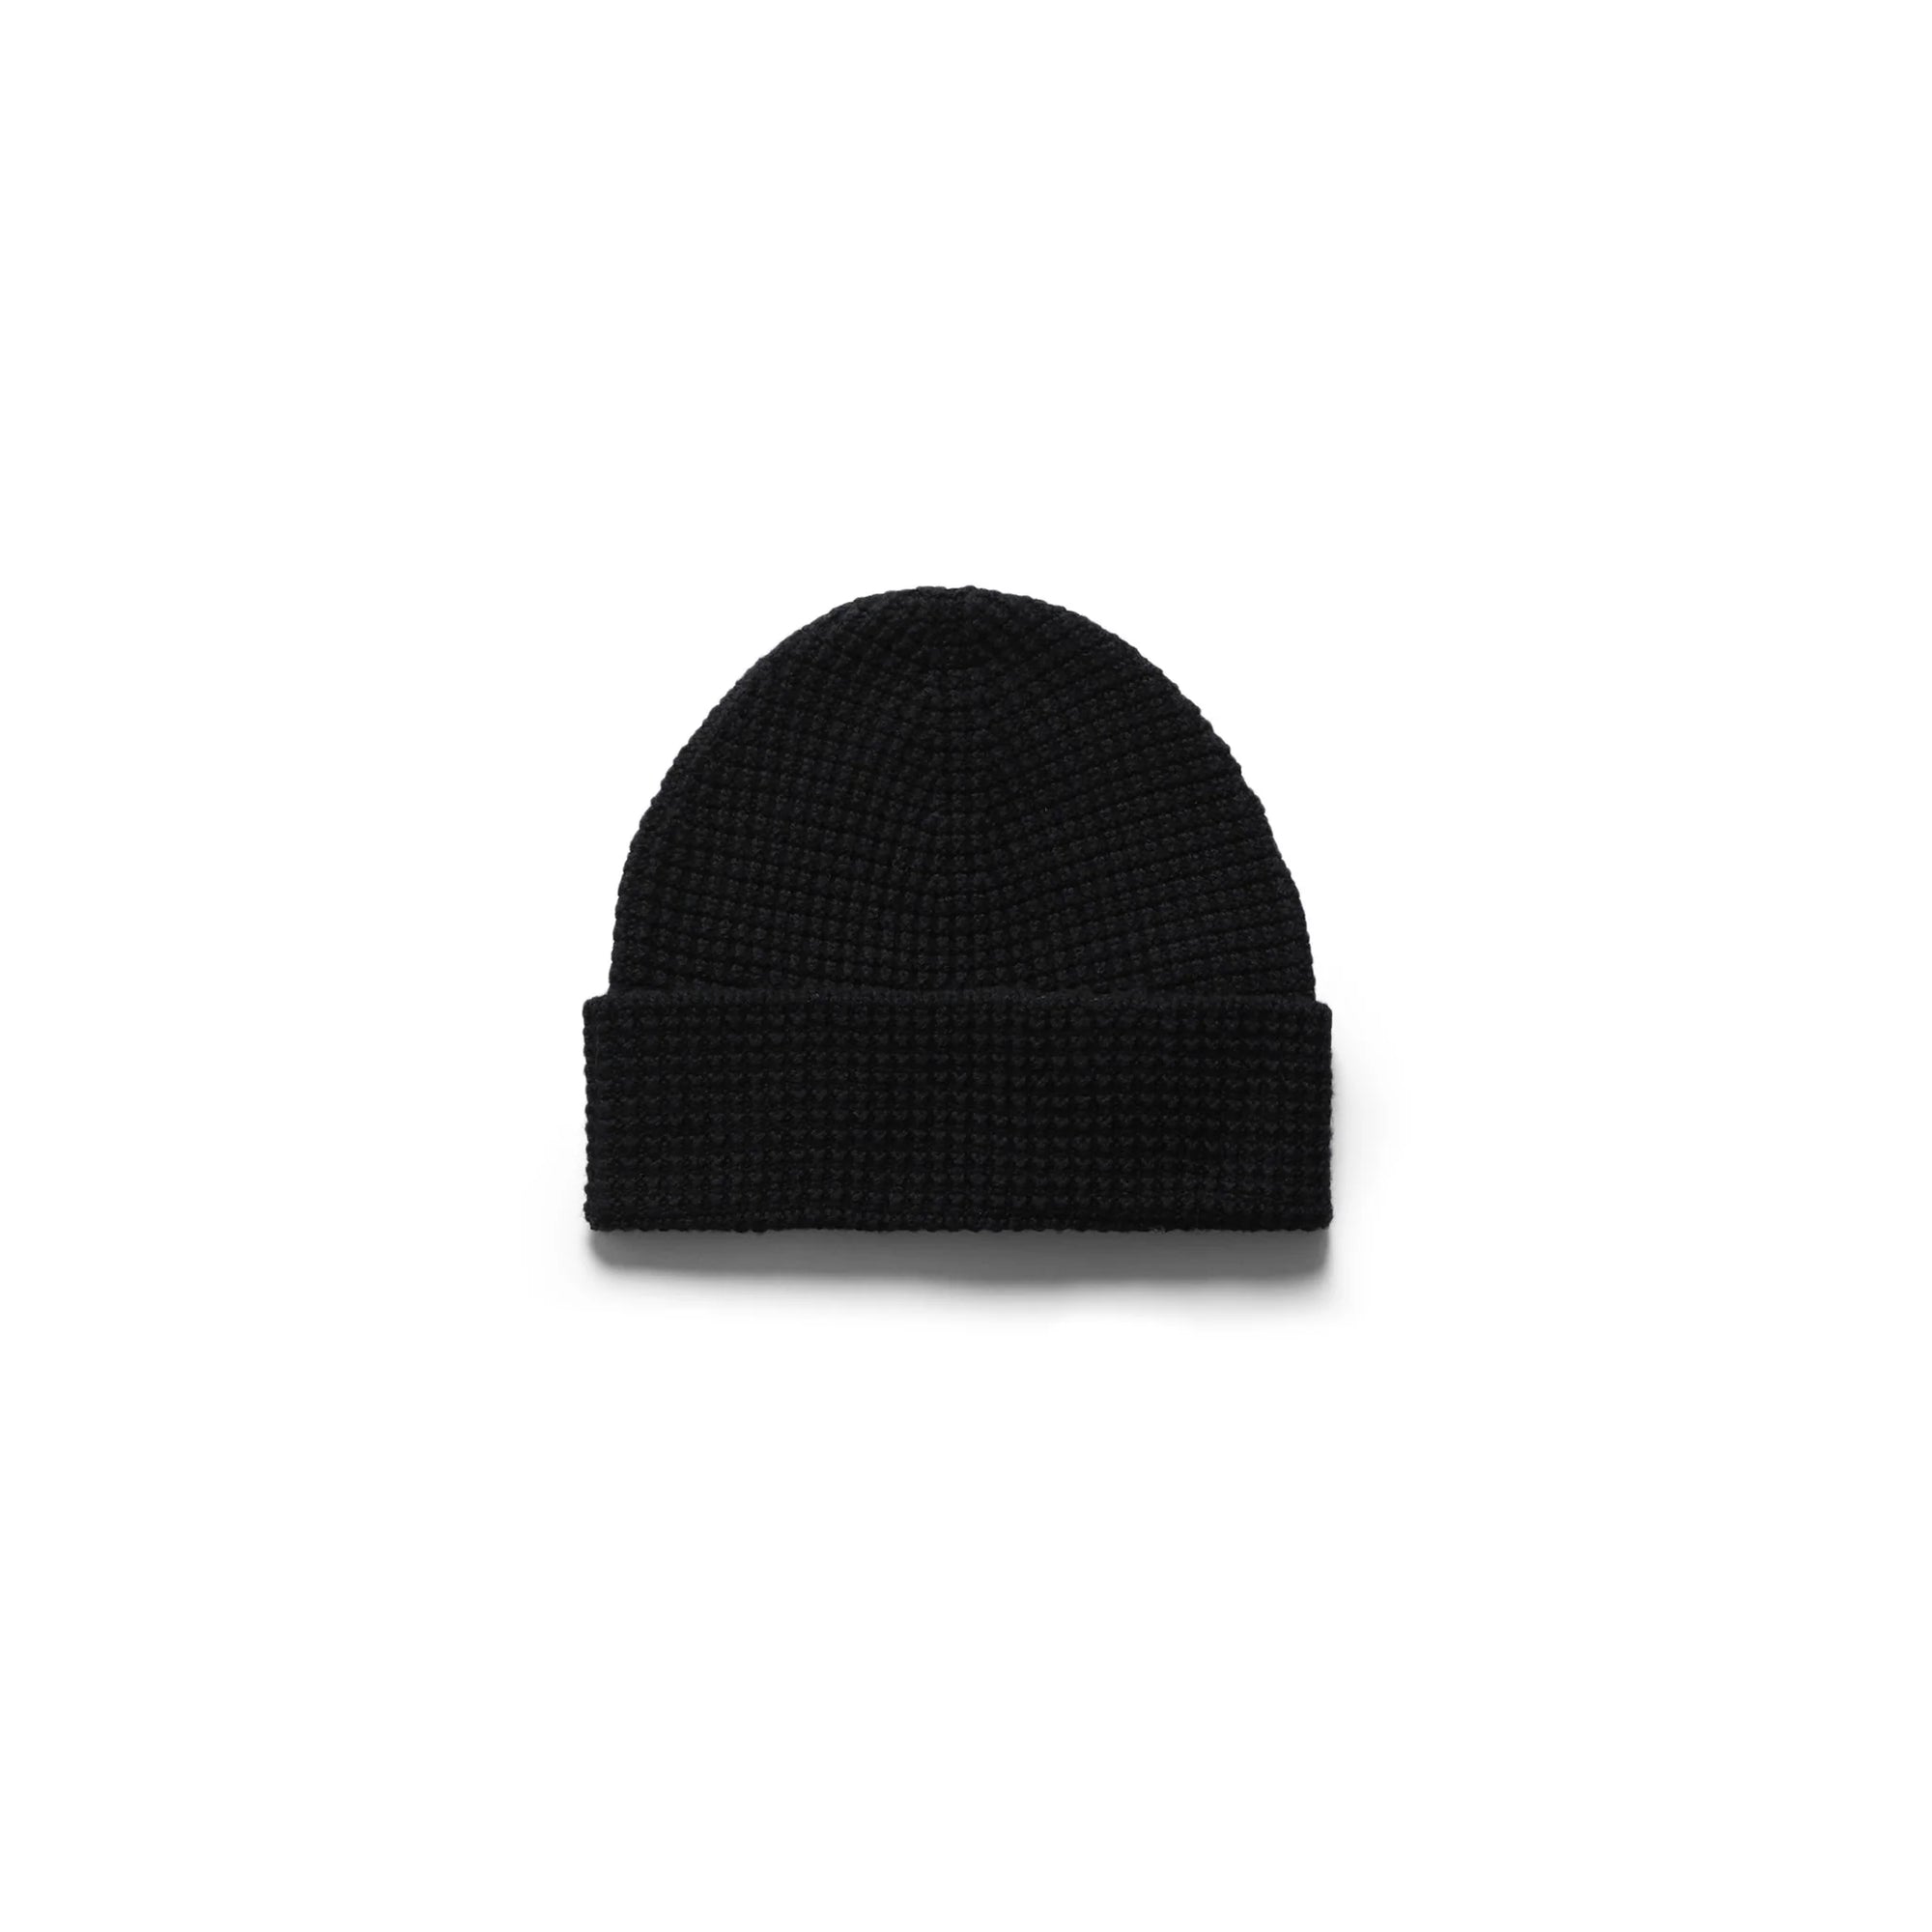 Reigning Champ Waffle Knit Beanie in Black